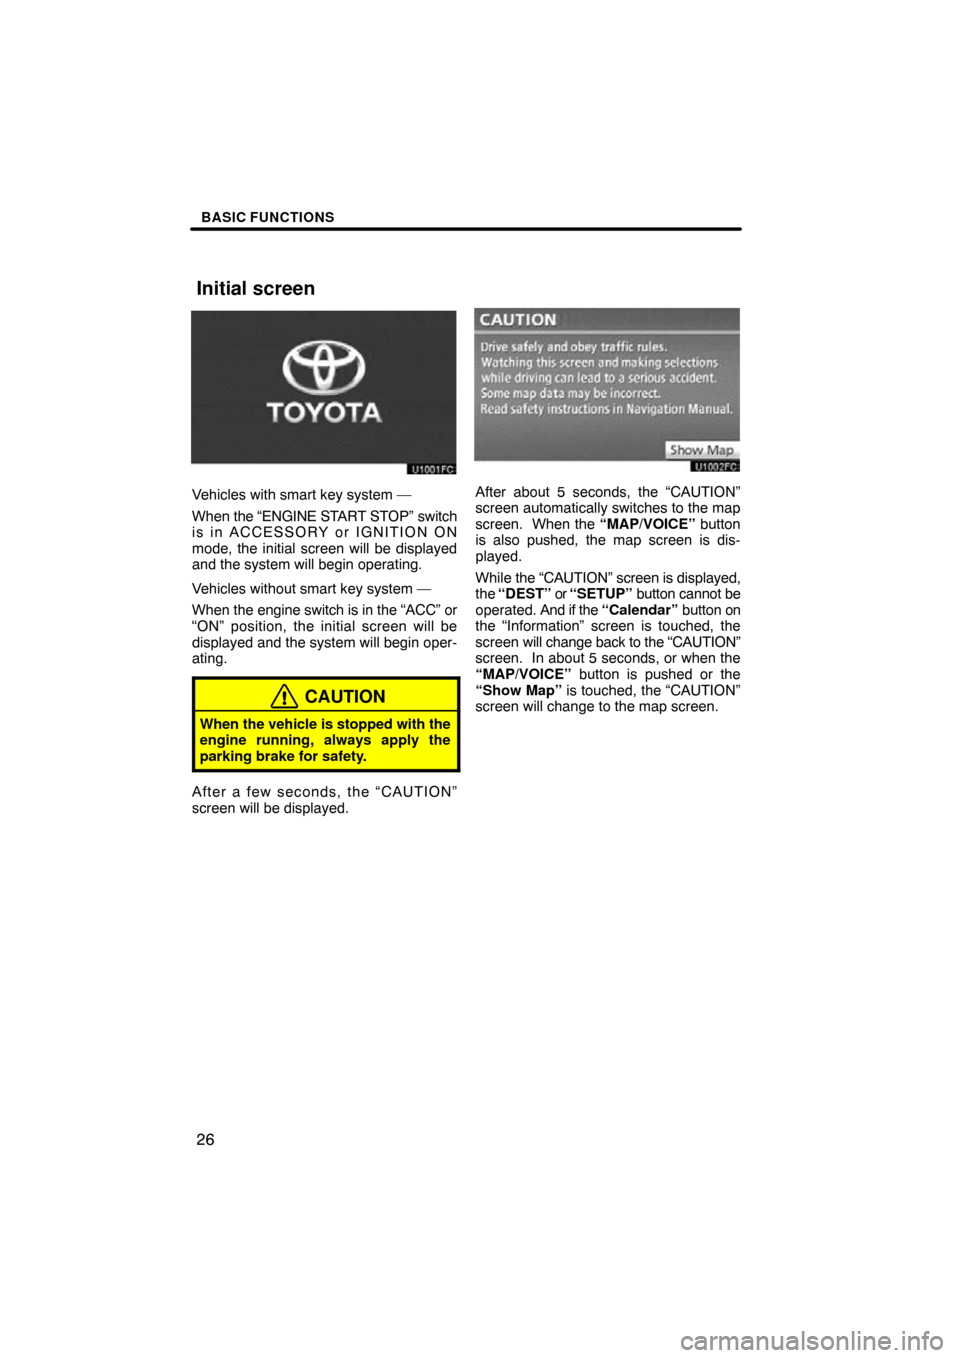 TOYOTA SIENNA 2012 XL30 / 3.G Navigation Manual BASIC FUNCTIONS
26
Vehicles with smart key system —
When the “ENGINE START STOP” switch
is in ACCESSORY or IGNITION ON
mode, the initial screen will be displayed
and the system will begin operat